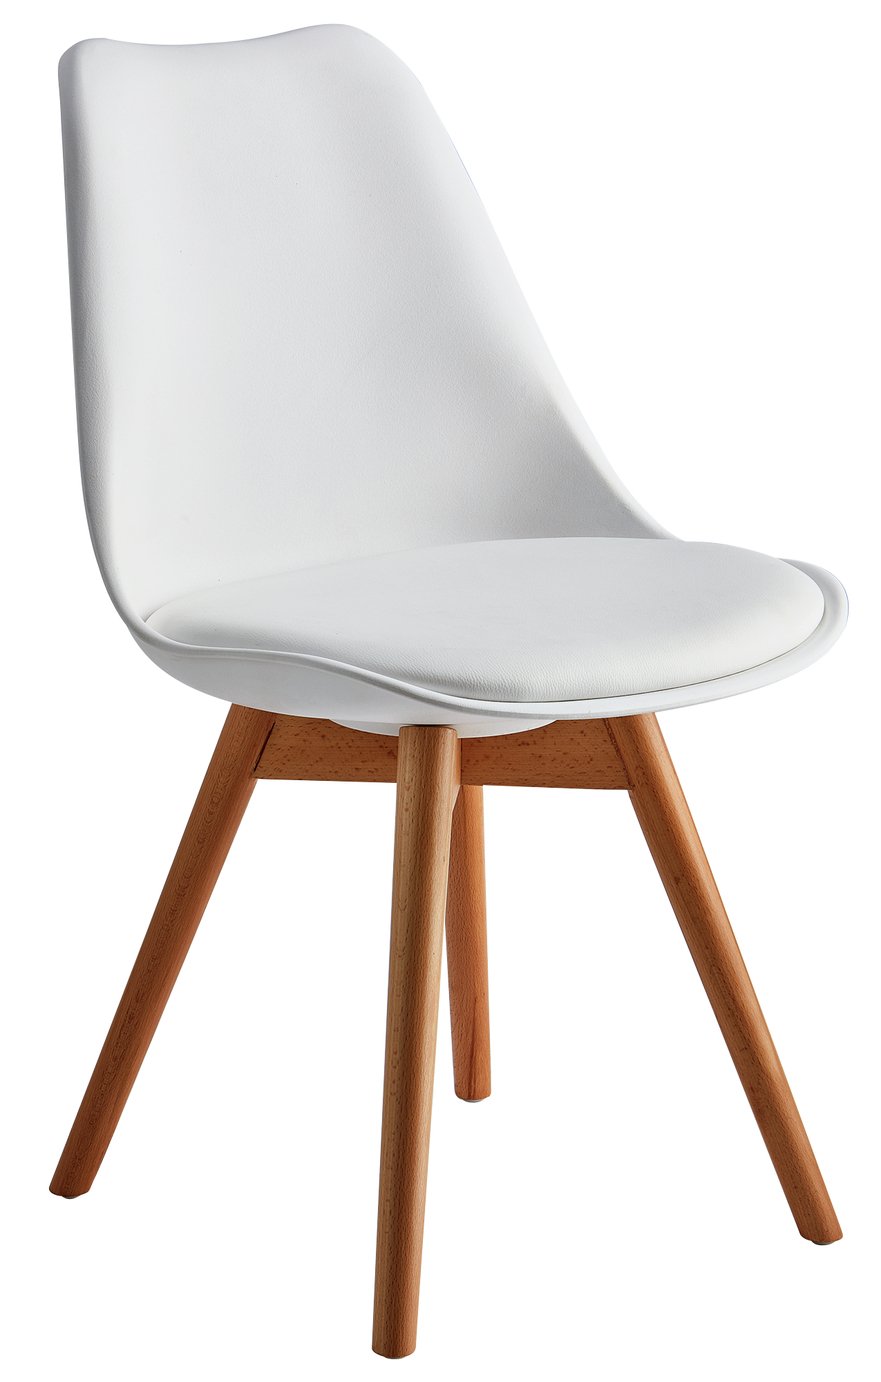 Kitchen Chairs hygena new charlie dining chair - white GVFPPCR